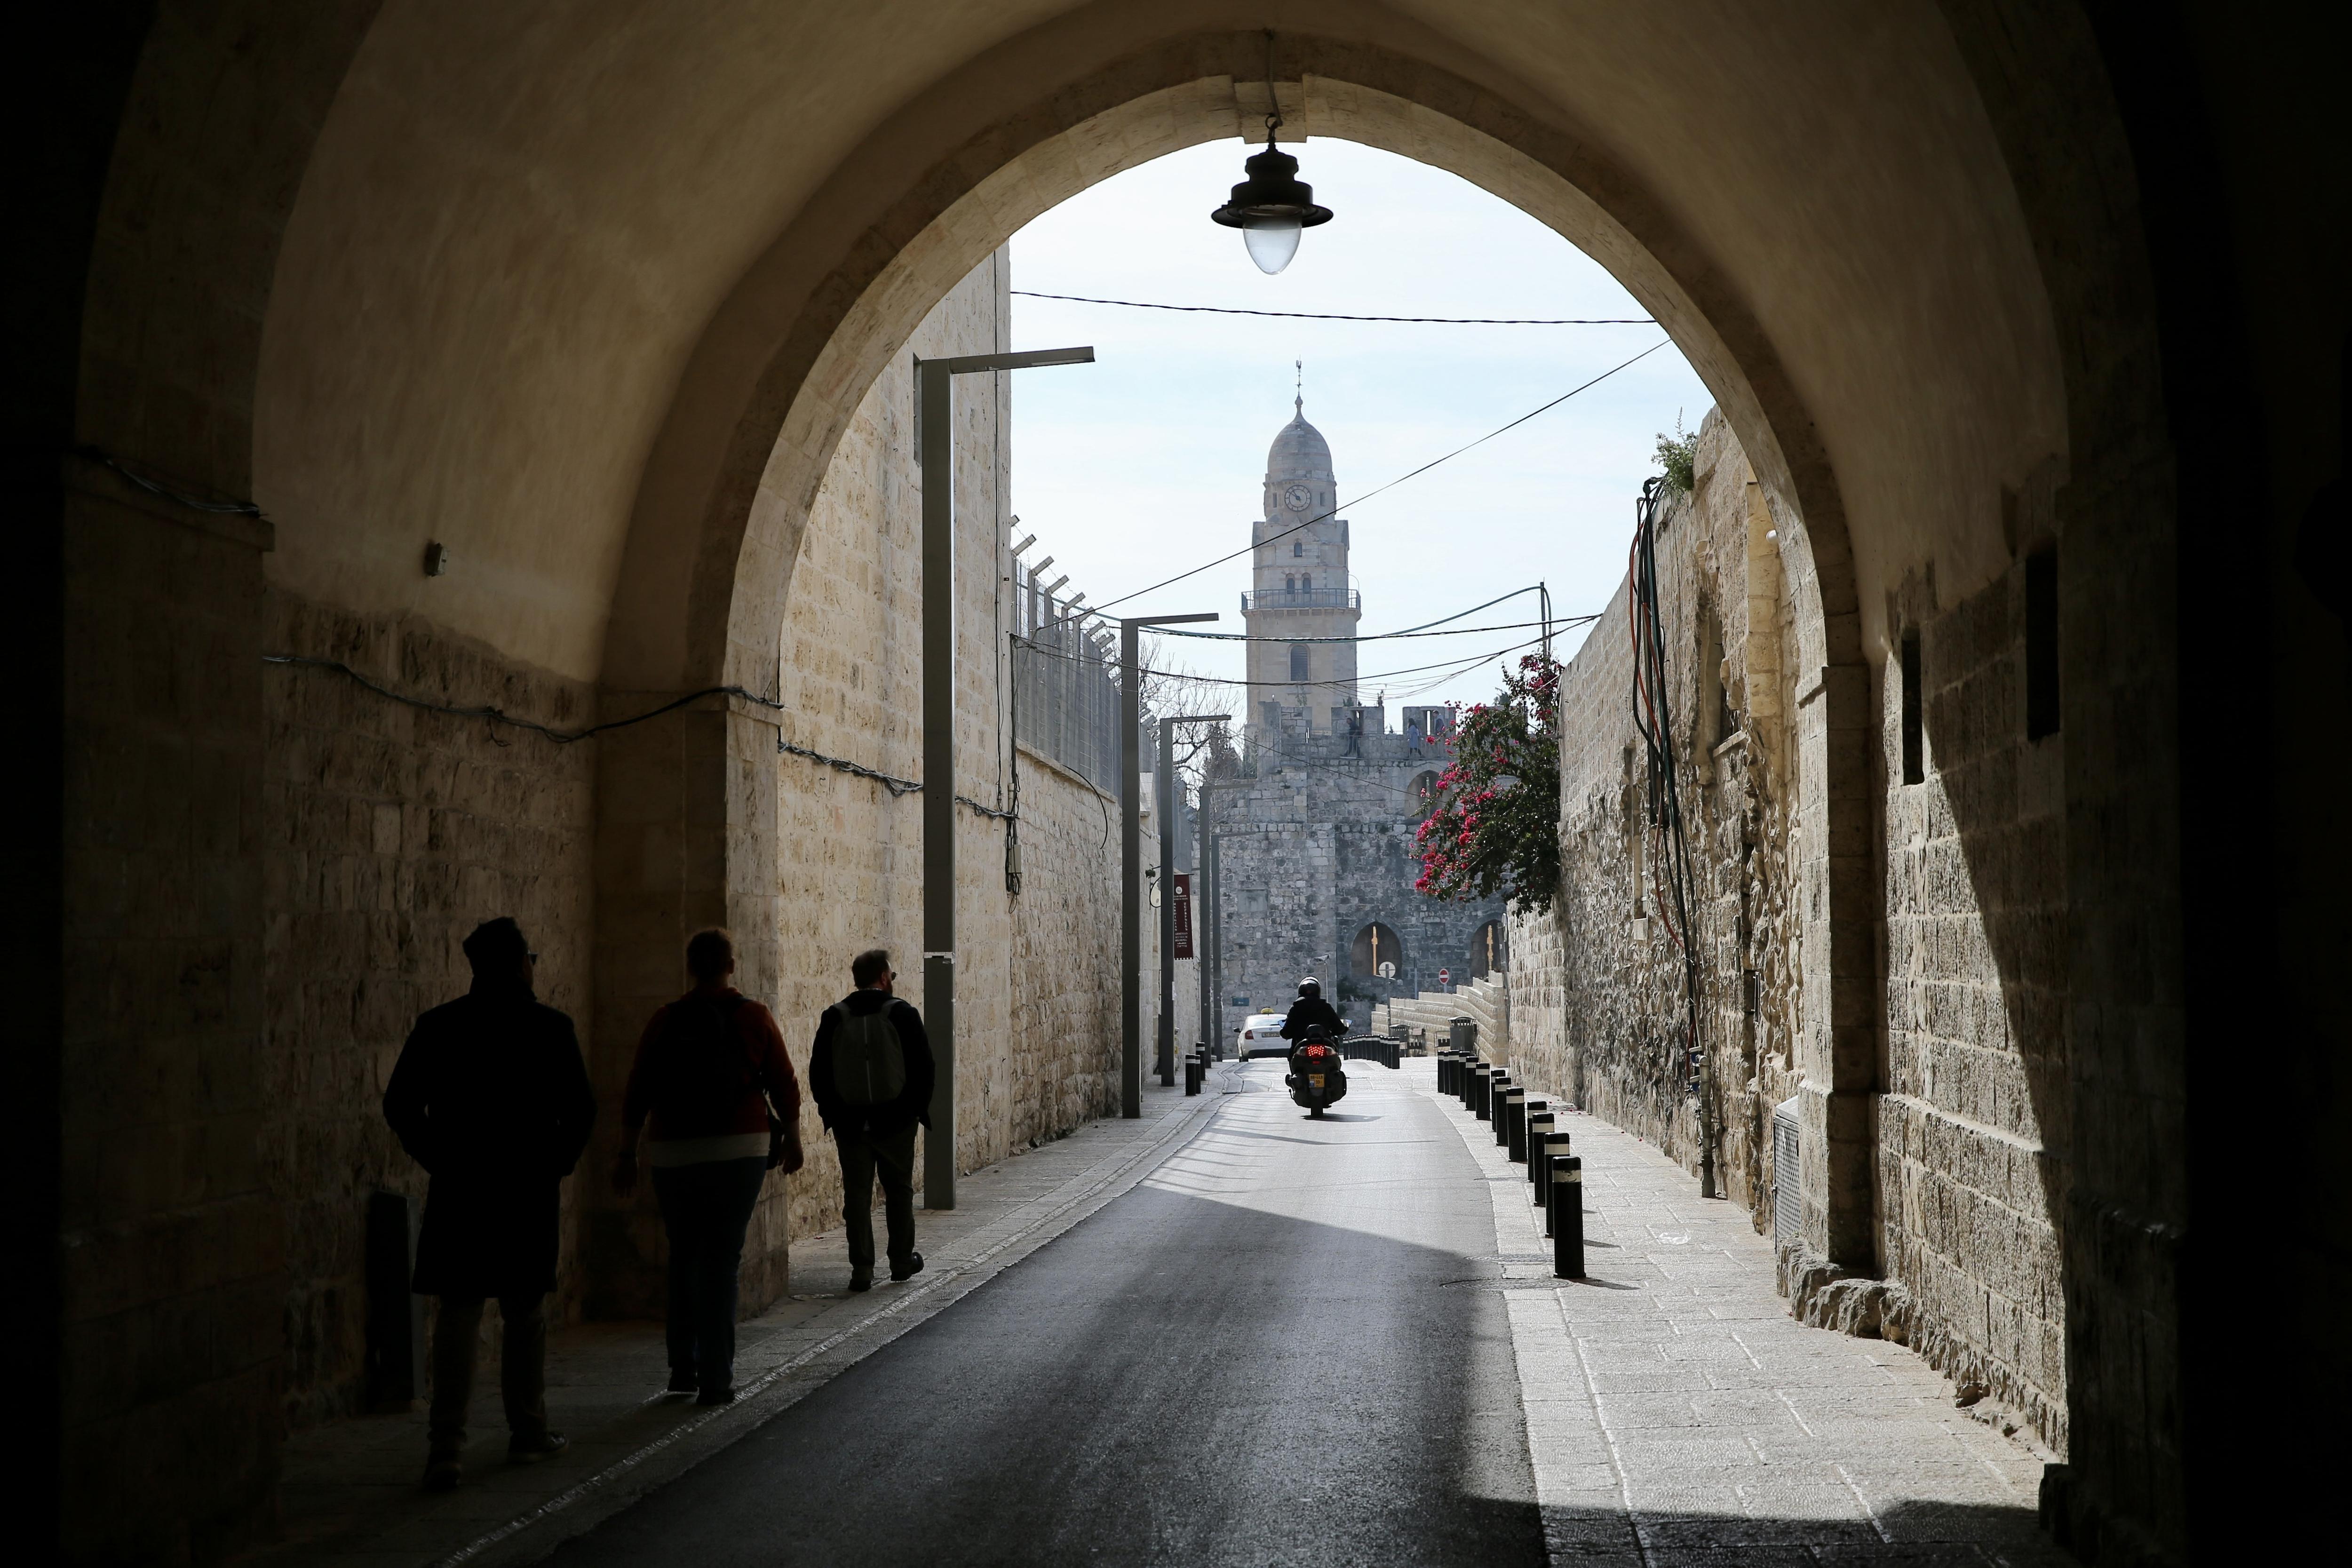 The property deal that could threaten Armenian land in Jerusalem